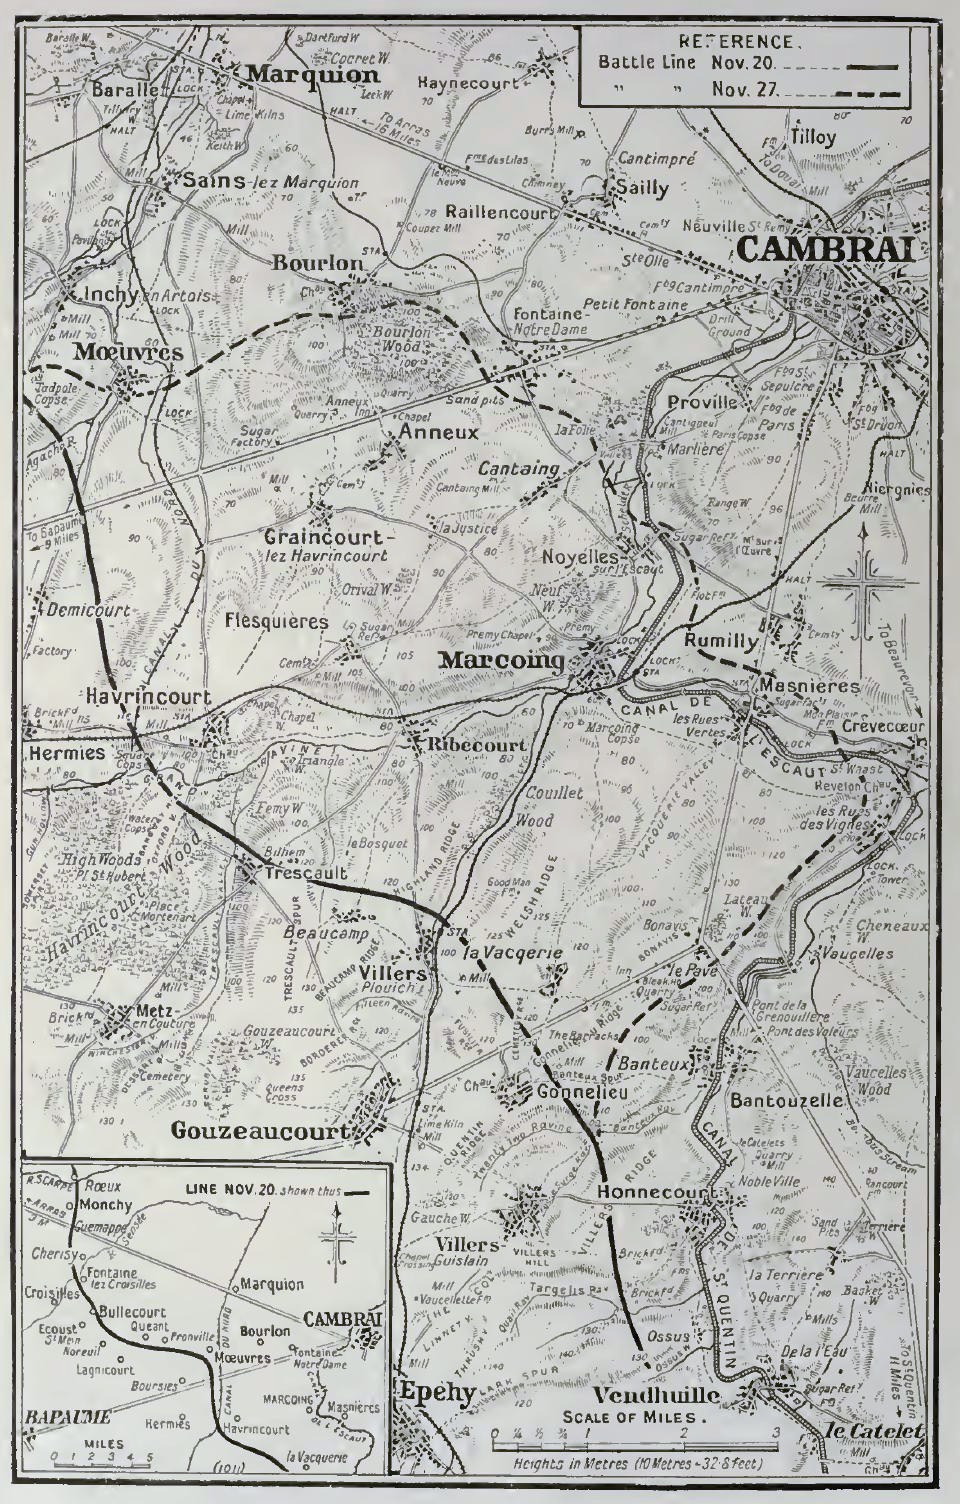 Map of Cambrai area in 1917